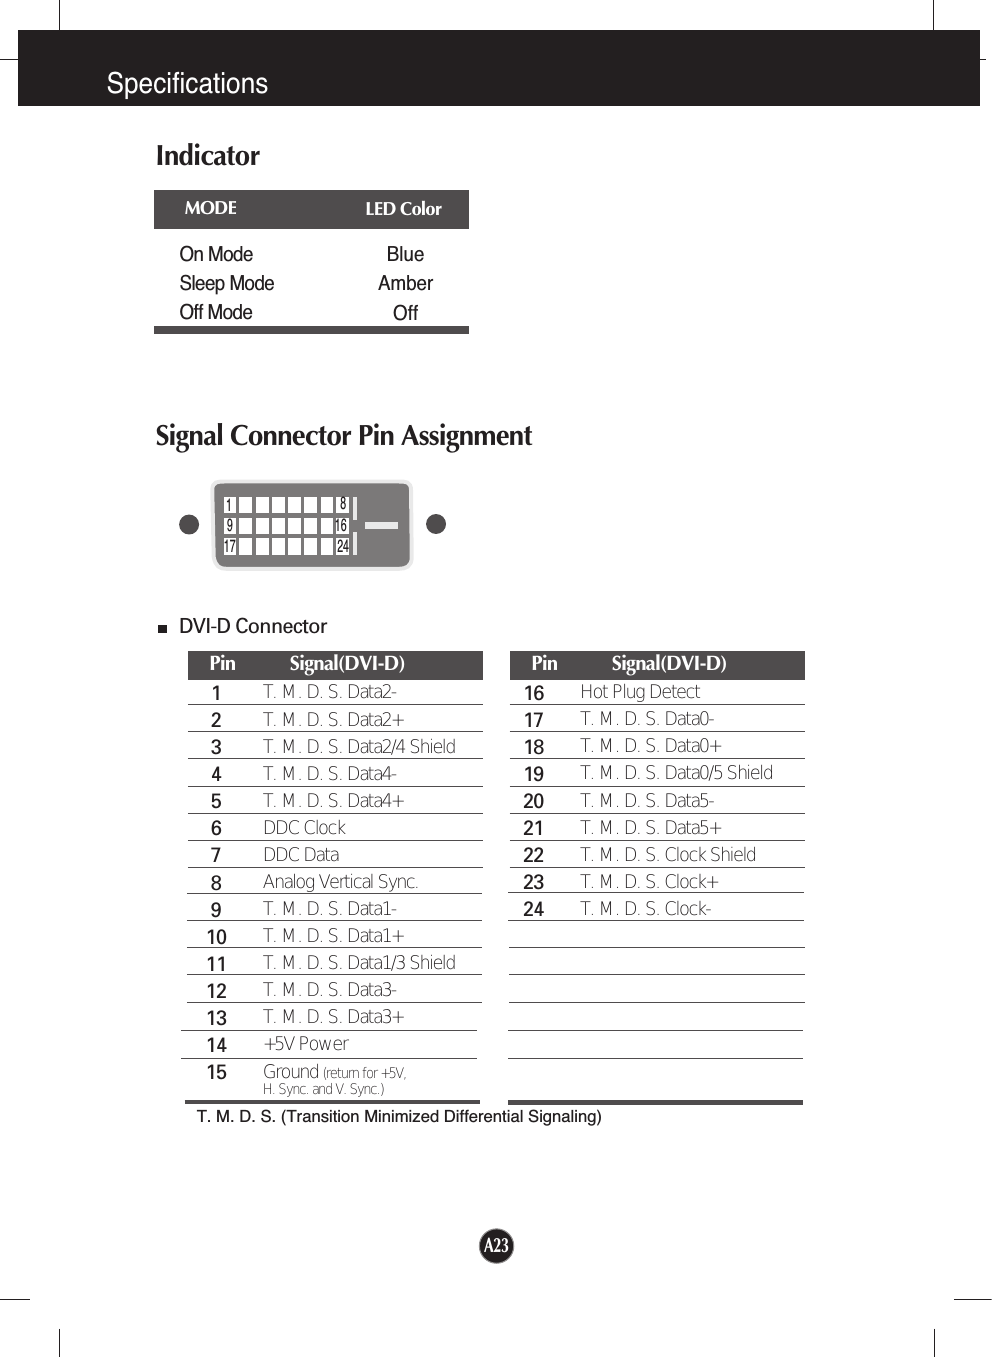 A23Signal Connector Pin Assignment18917 2416Pin           Signal(DVI-D)123456789101112131415T. M. D. S. Data2-T. M. D. S. Data2+T. M. D. S. Data2/4 ShieldT. M. D. S. Data4-T. M. D. S. Data4+DDC ClockDDC DataAnalog Vertical Sync.T. M. D. S. Data1-T. M. D. S. Data1+T. M. D. S. Data1/3 ShieldT. M. D. S. Data3-T. M. D. S. Data3++5V PowerGround (return for +5V, H. Sync. and V. Sync.)Pin           Signal(DVI-D)161718192021222324Hot Plug DetectT. M. D. S. Data0-T. M. D. S. Data0+T. M. D. S. Data0/5 ShieldT. M. D. S. Data5-T. M. D. S. Data5+T. M. D. S. Clock ShieldT. M. D. S. Clock+T. M. D. S. Clock-T. M. D. S. (Transition Minimized Differential Signaling)DVI-D Connector SpecificationsIndicatorOn ModeSleep ModeOff ModeBlueAmberOffLED ColorMODE